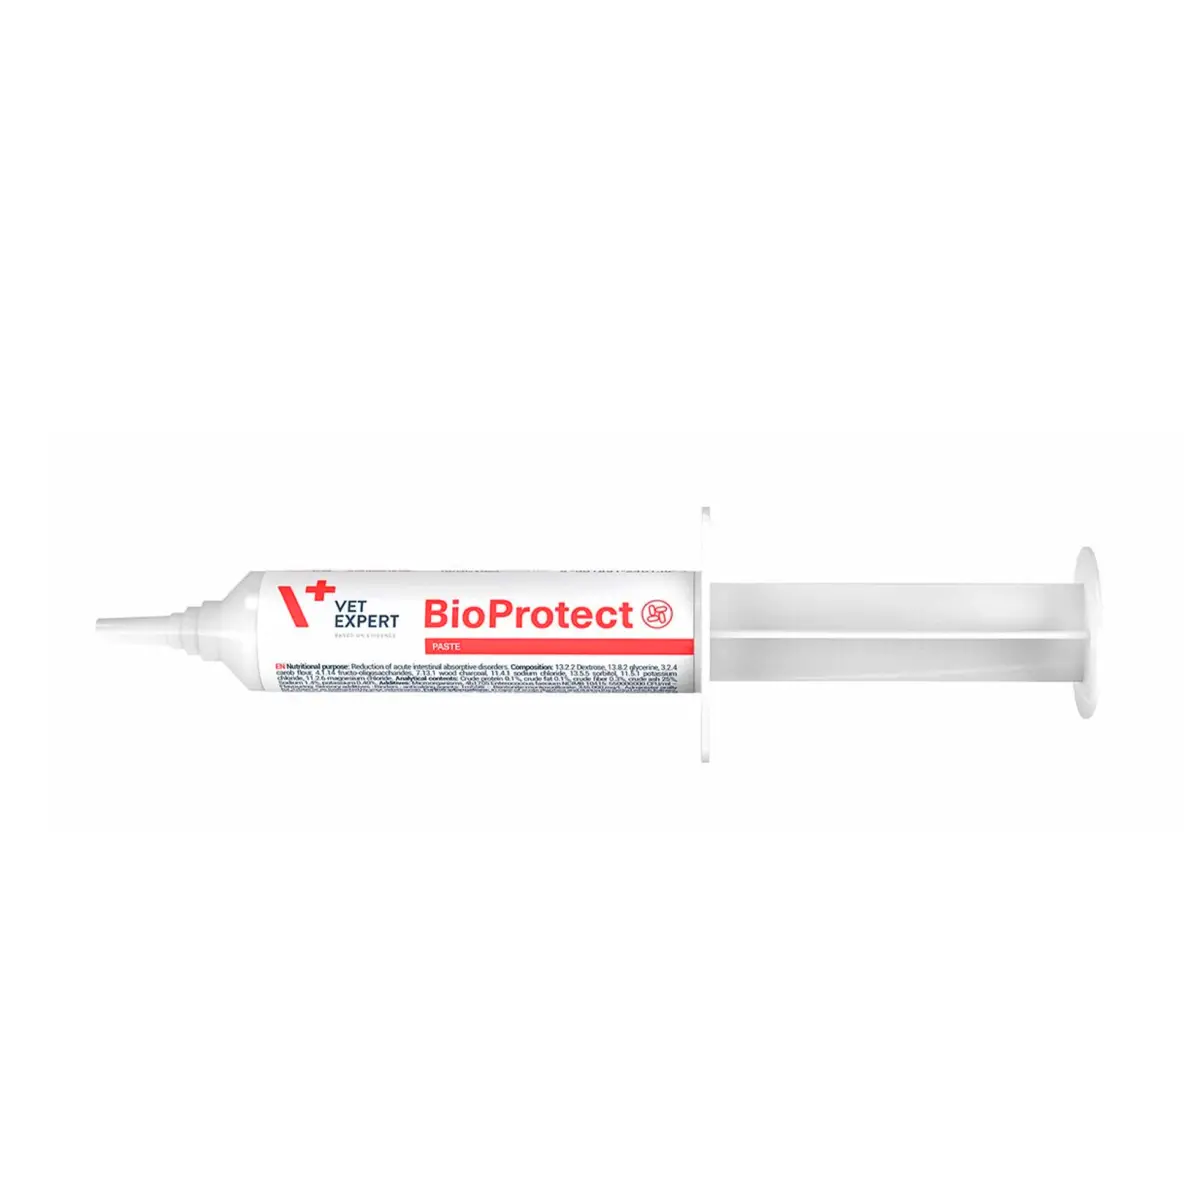 Vet Expert BioProtect (Intestinal Supplement For Dogs & Cats) 15 Ml Paste